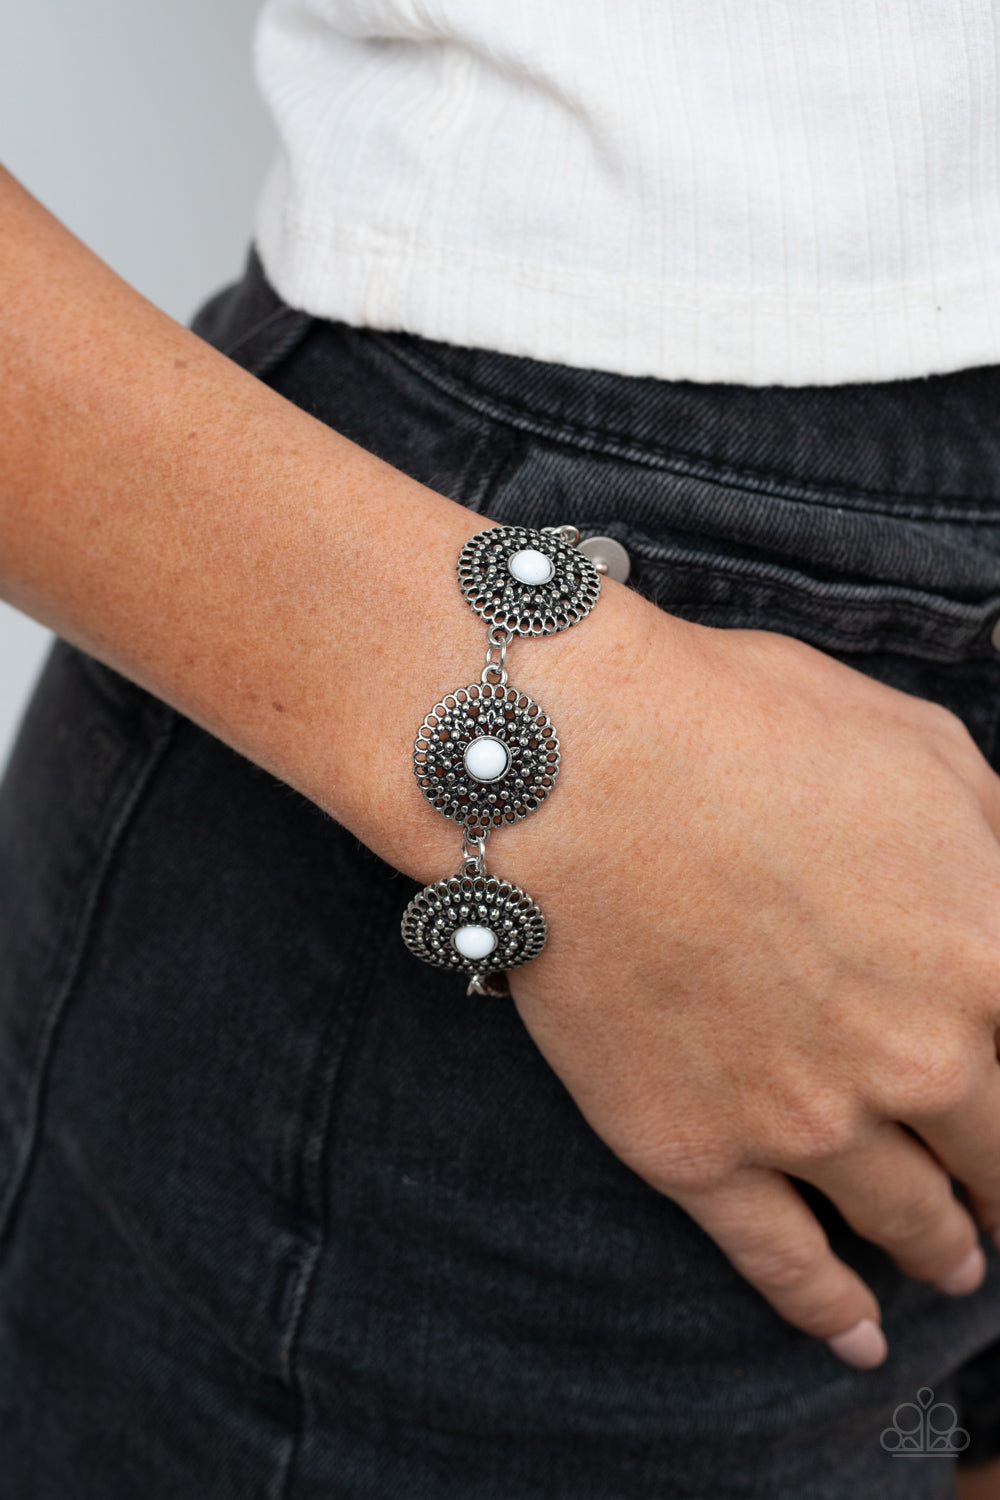 Mojave Mandalas - White and Silver Fashion Bracelet - Paparazzi Accessories - Dotted with dainty white beaded centers, shimmery studded silver floral frames delicately linked around the wrist for a colorfully whimsical look. Features an adjustable clasp closure.